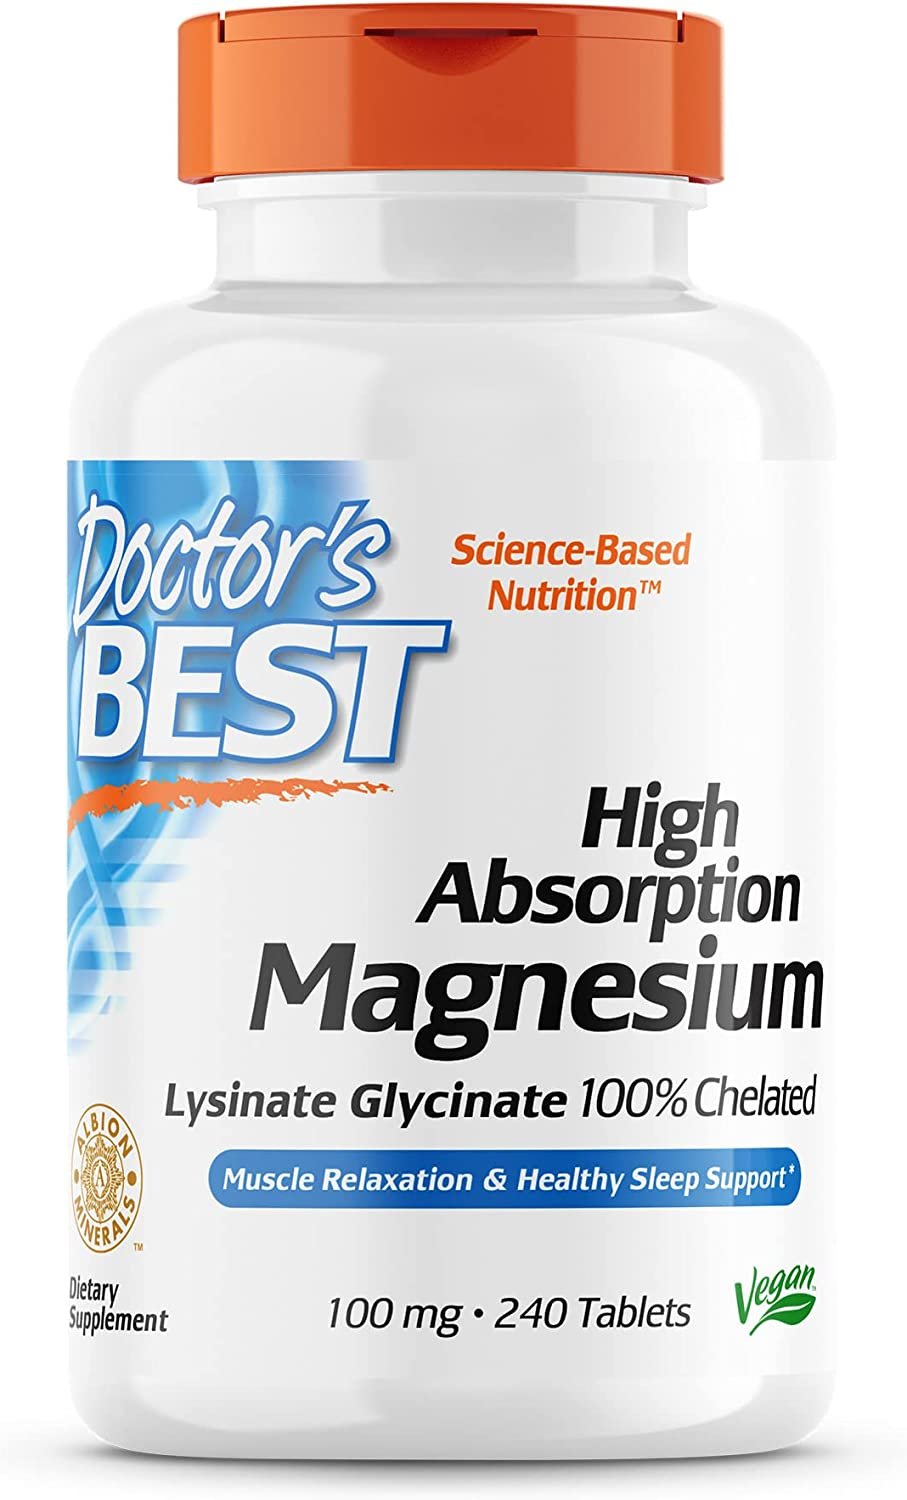 Doctor's Best High Absorption Magnesium